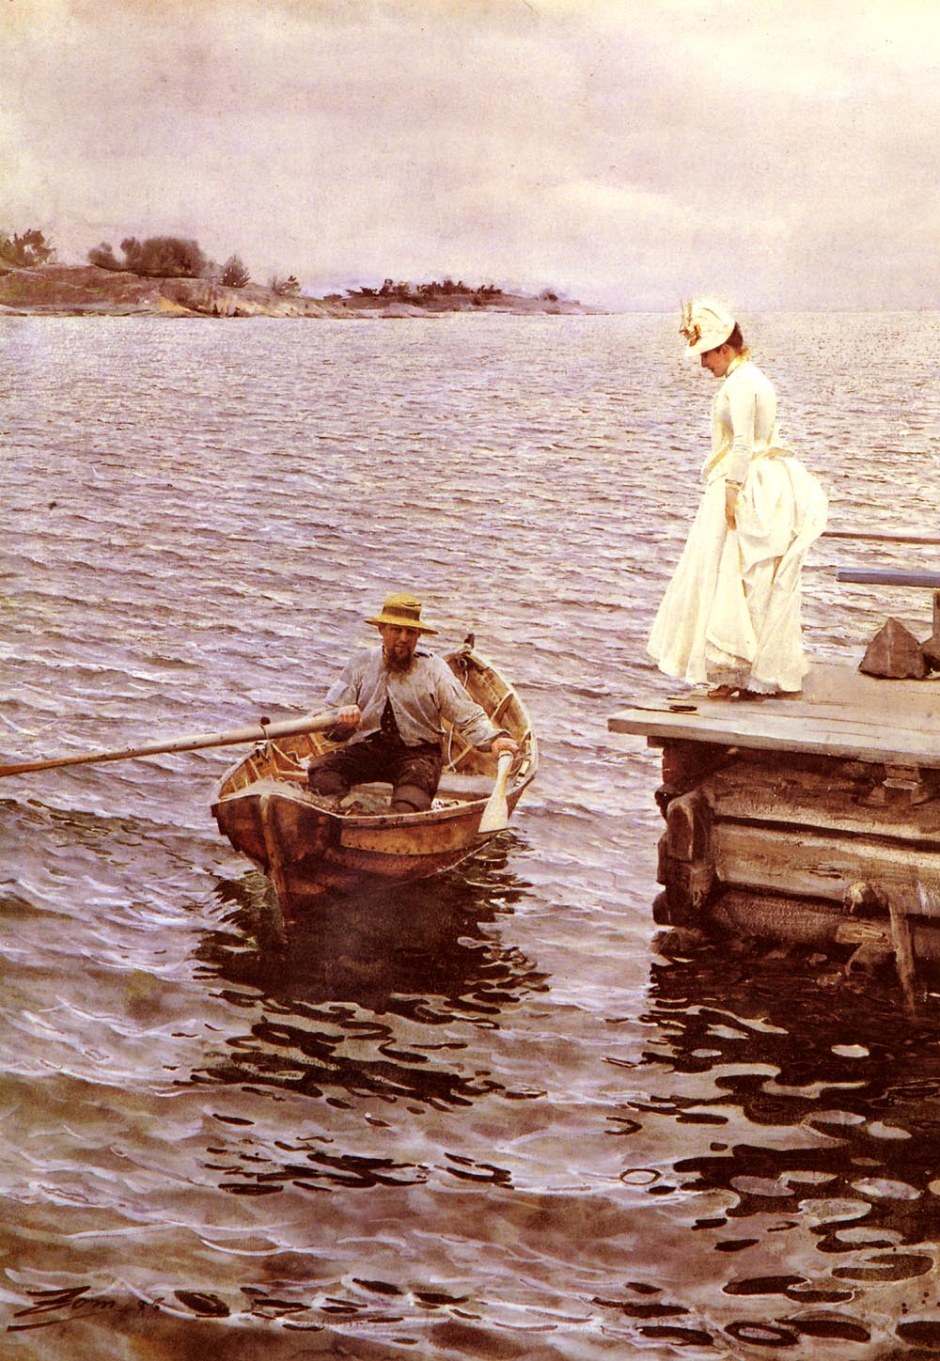 Anders Zorn, Summer Vacation (1886), watercolour, 76 x 56 cm, Private collection. WikiArt.